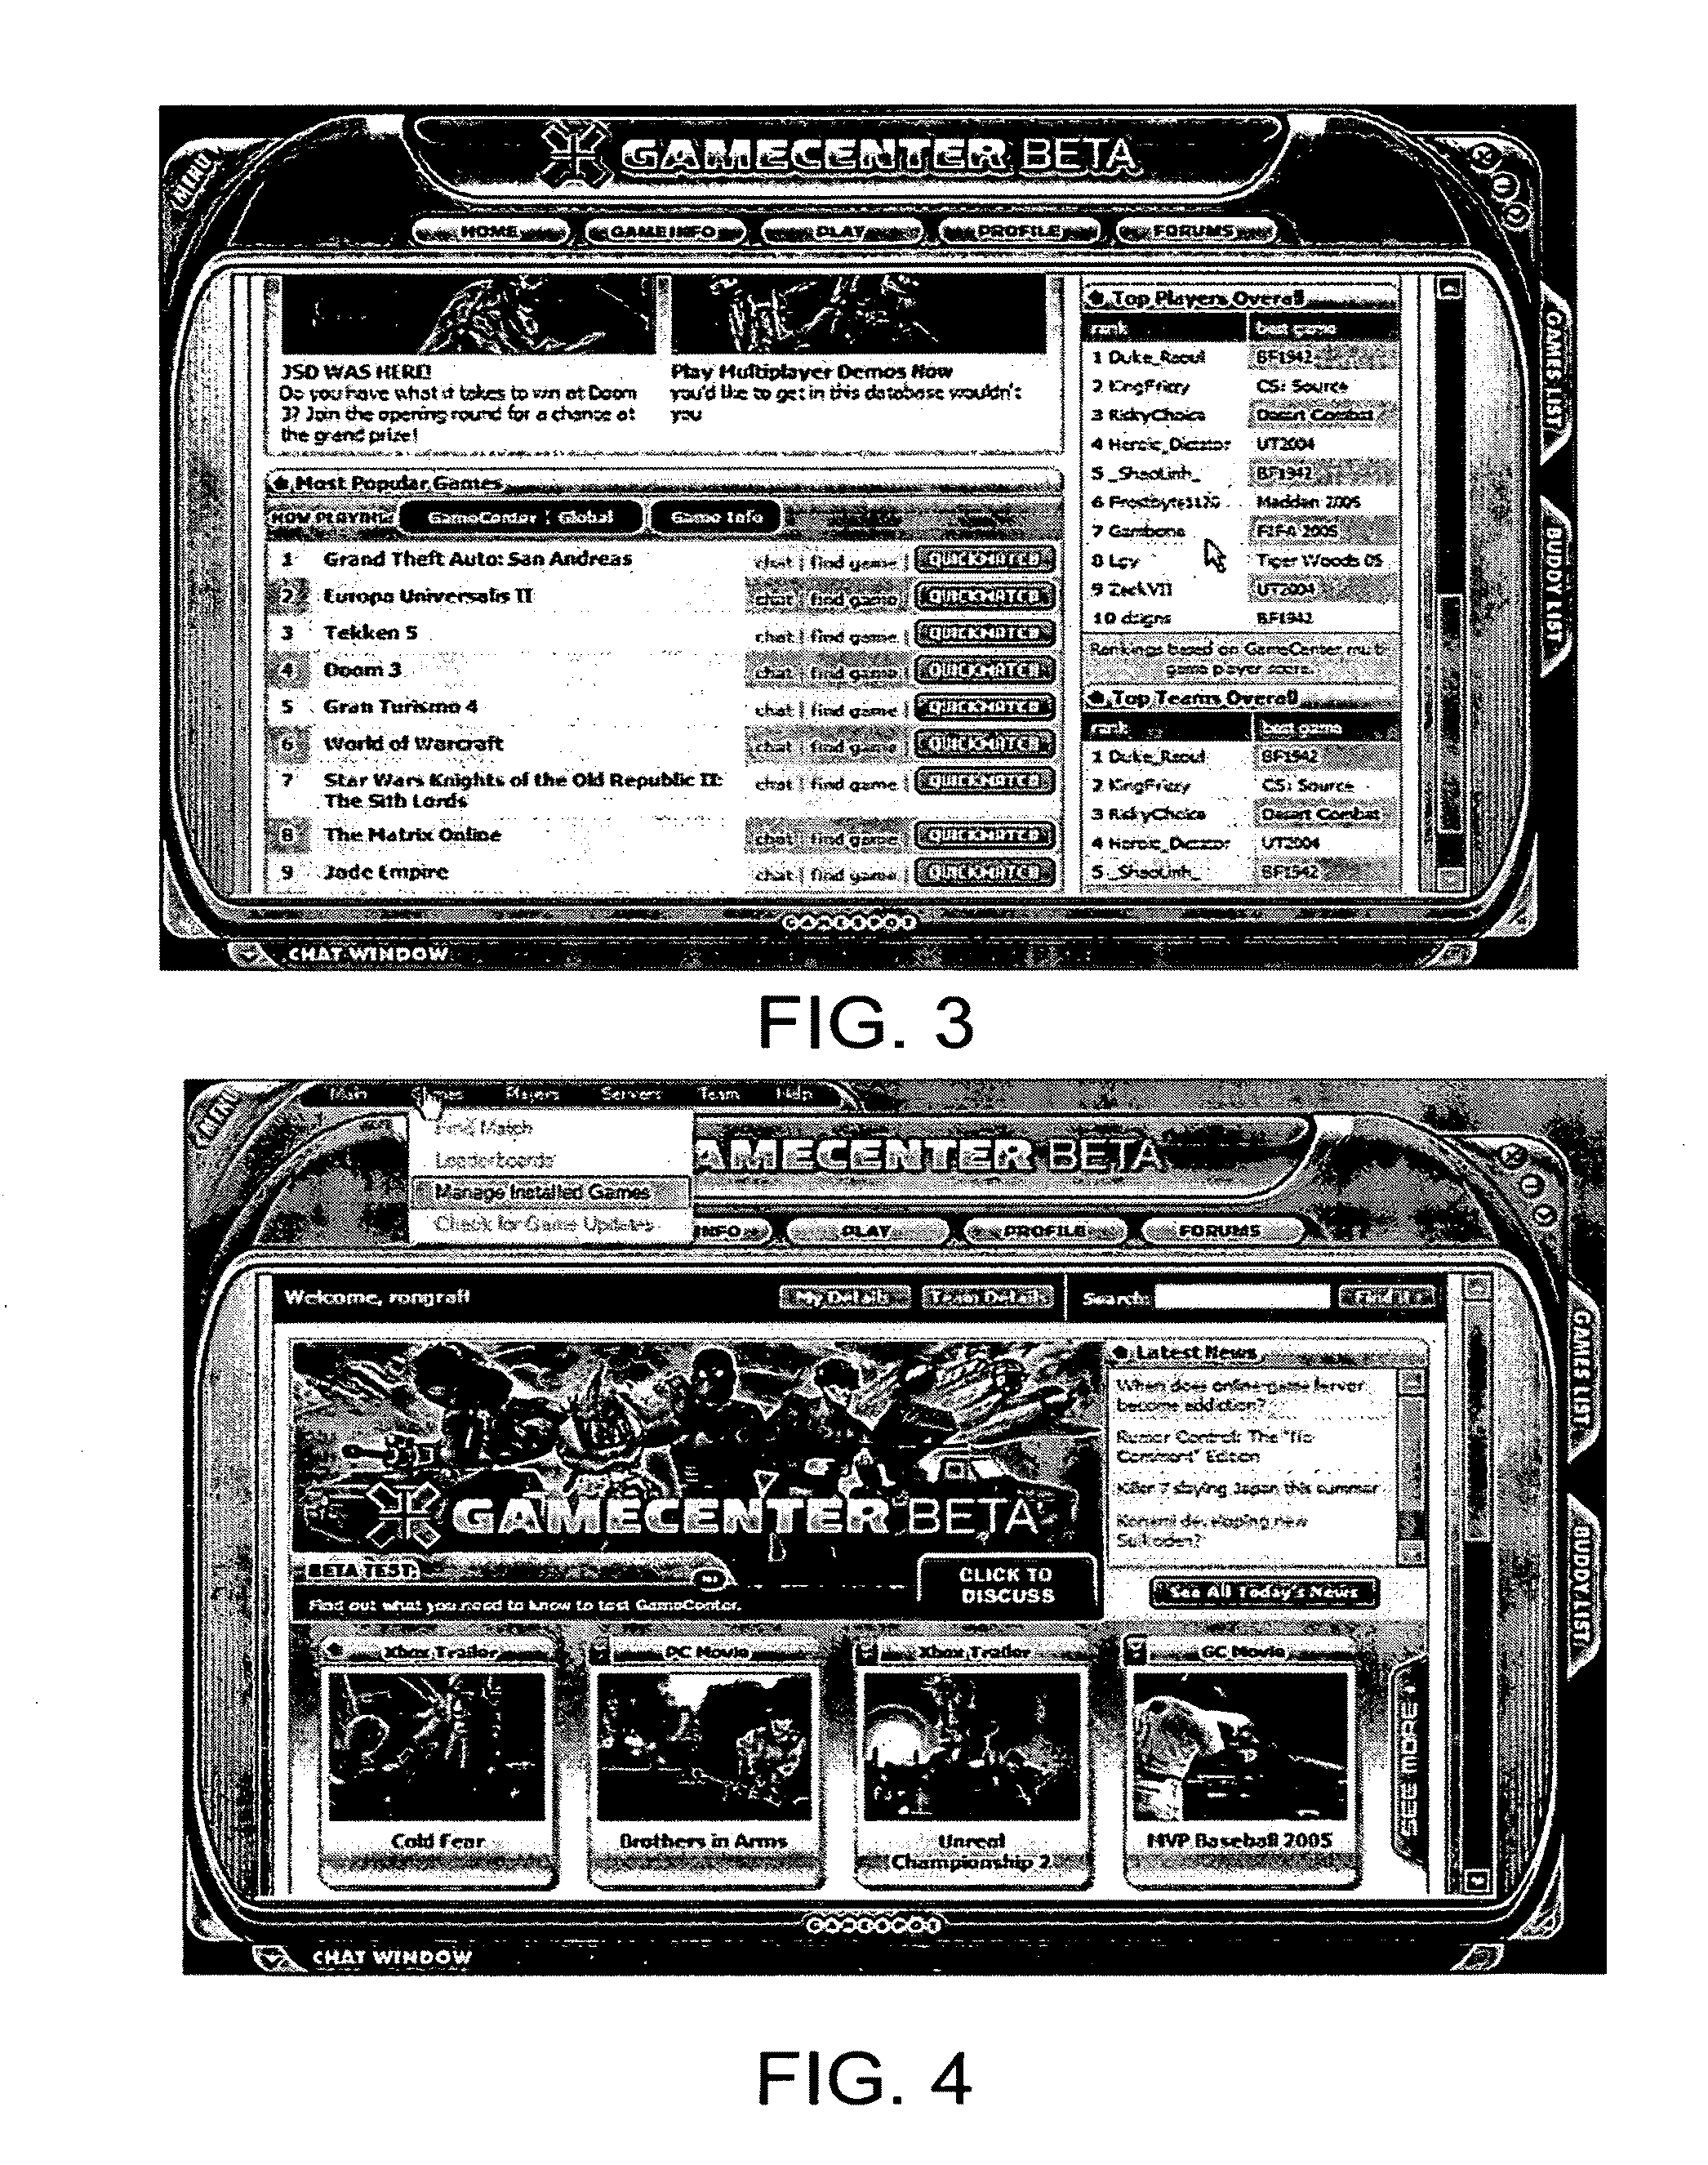 Collaborative online gaming system and method